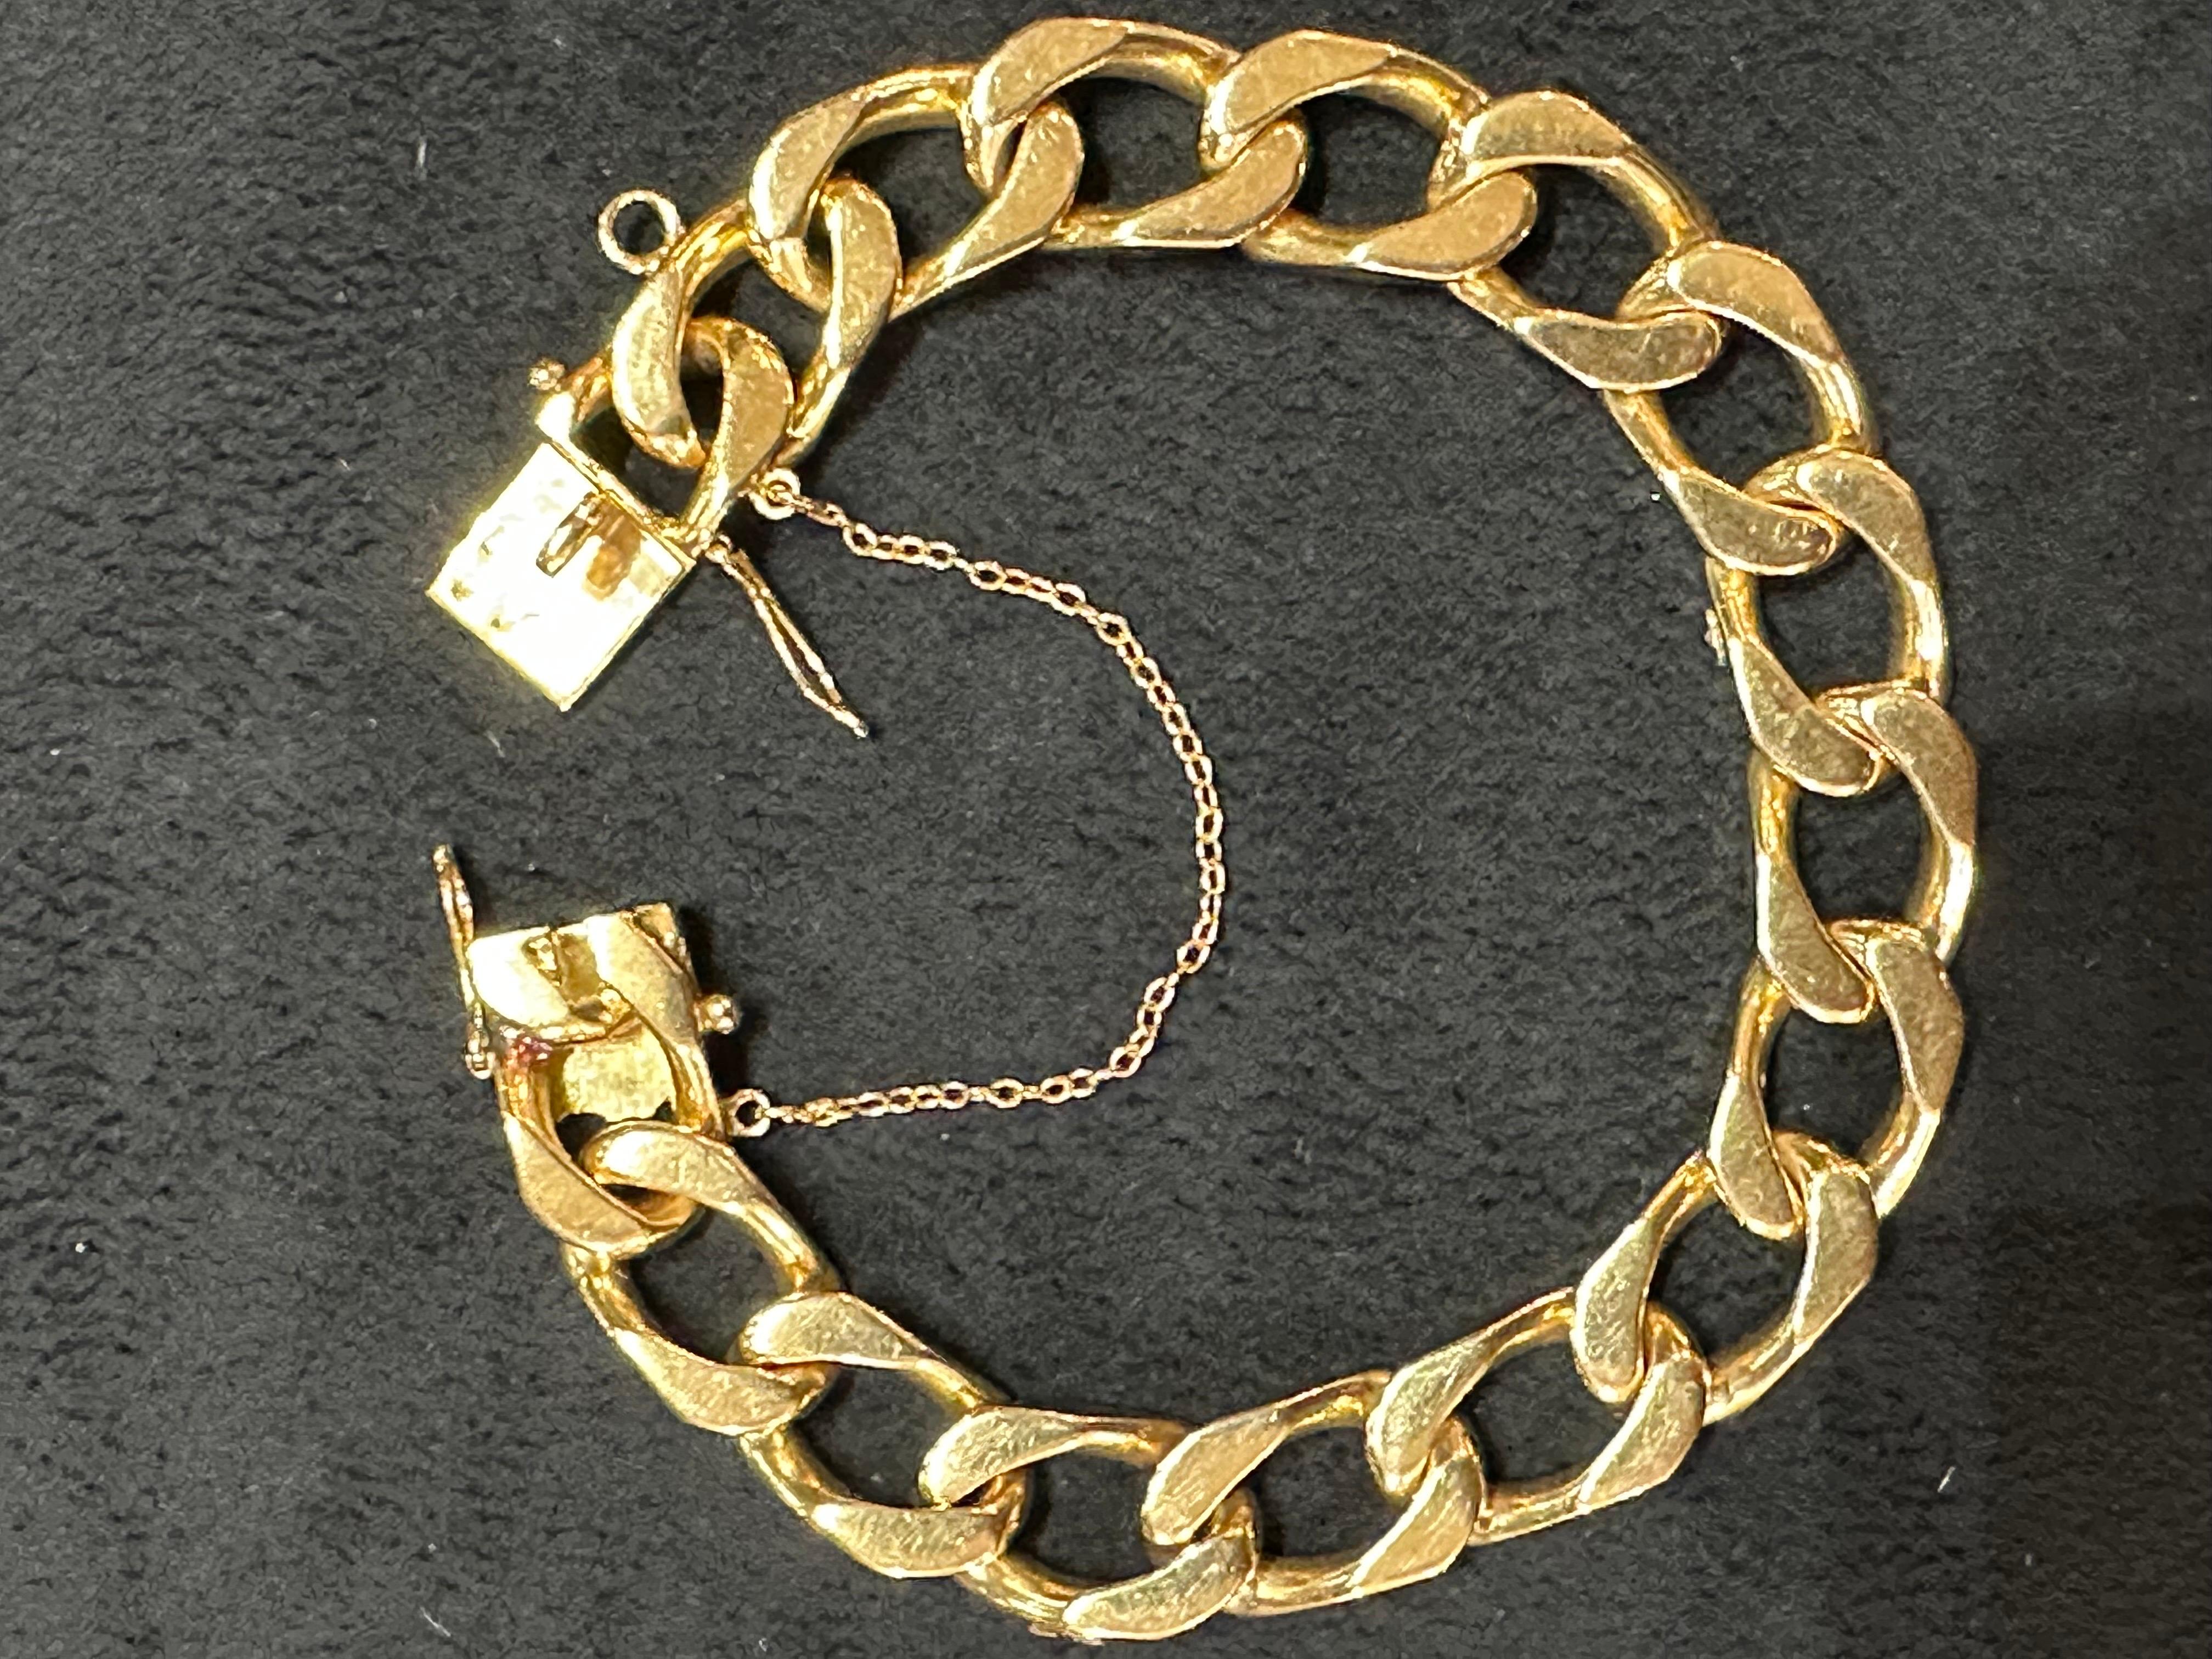 Bracelet Mesh Gourmette Year 1960 Solid Gold 18 Carats 2